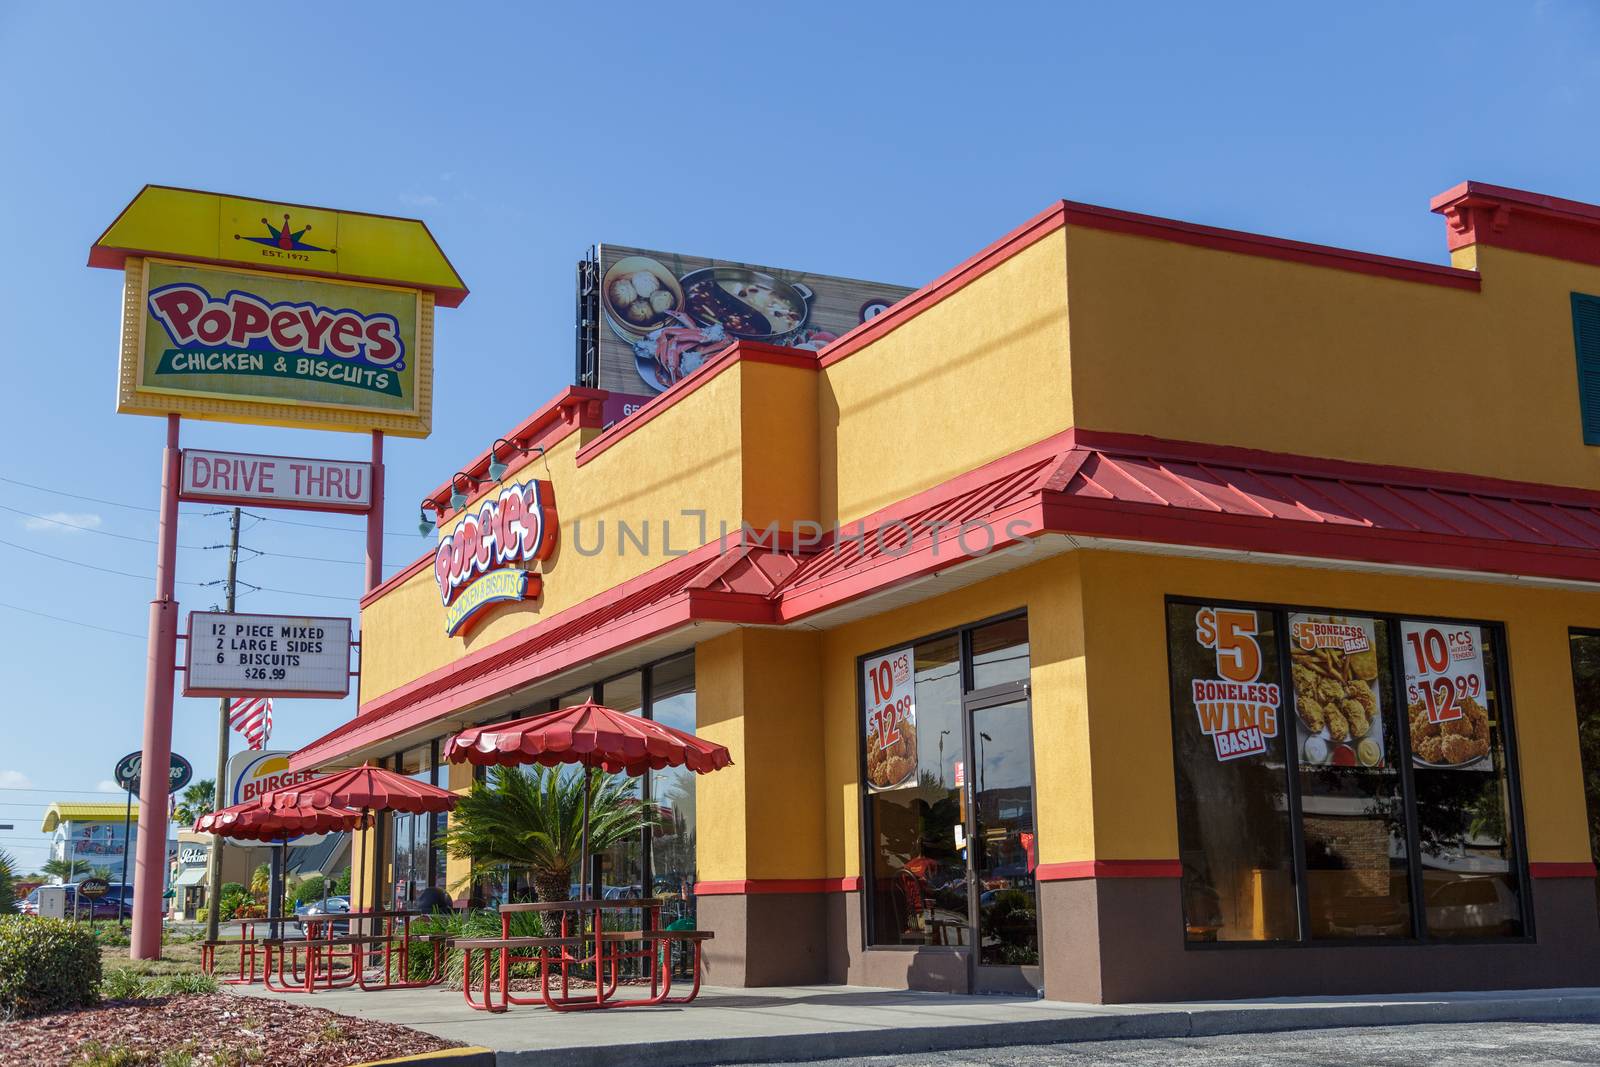 Orlando, Florida, USA - CIRCA, 2019: Popeyes restaurant building, which served fried chicken and New Orleans style cuisine for years, now adds a traditional chicken sandwich to the menu. by dugulan